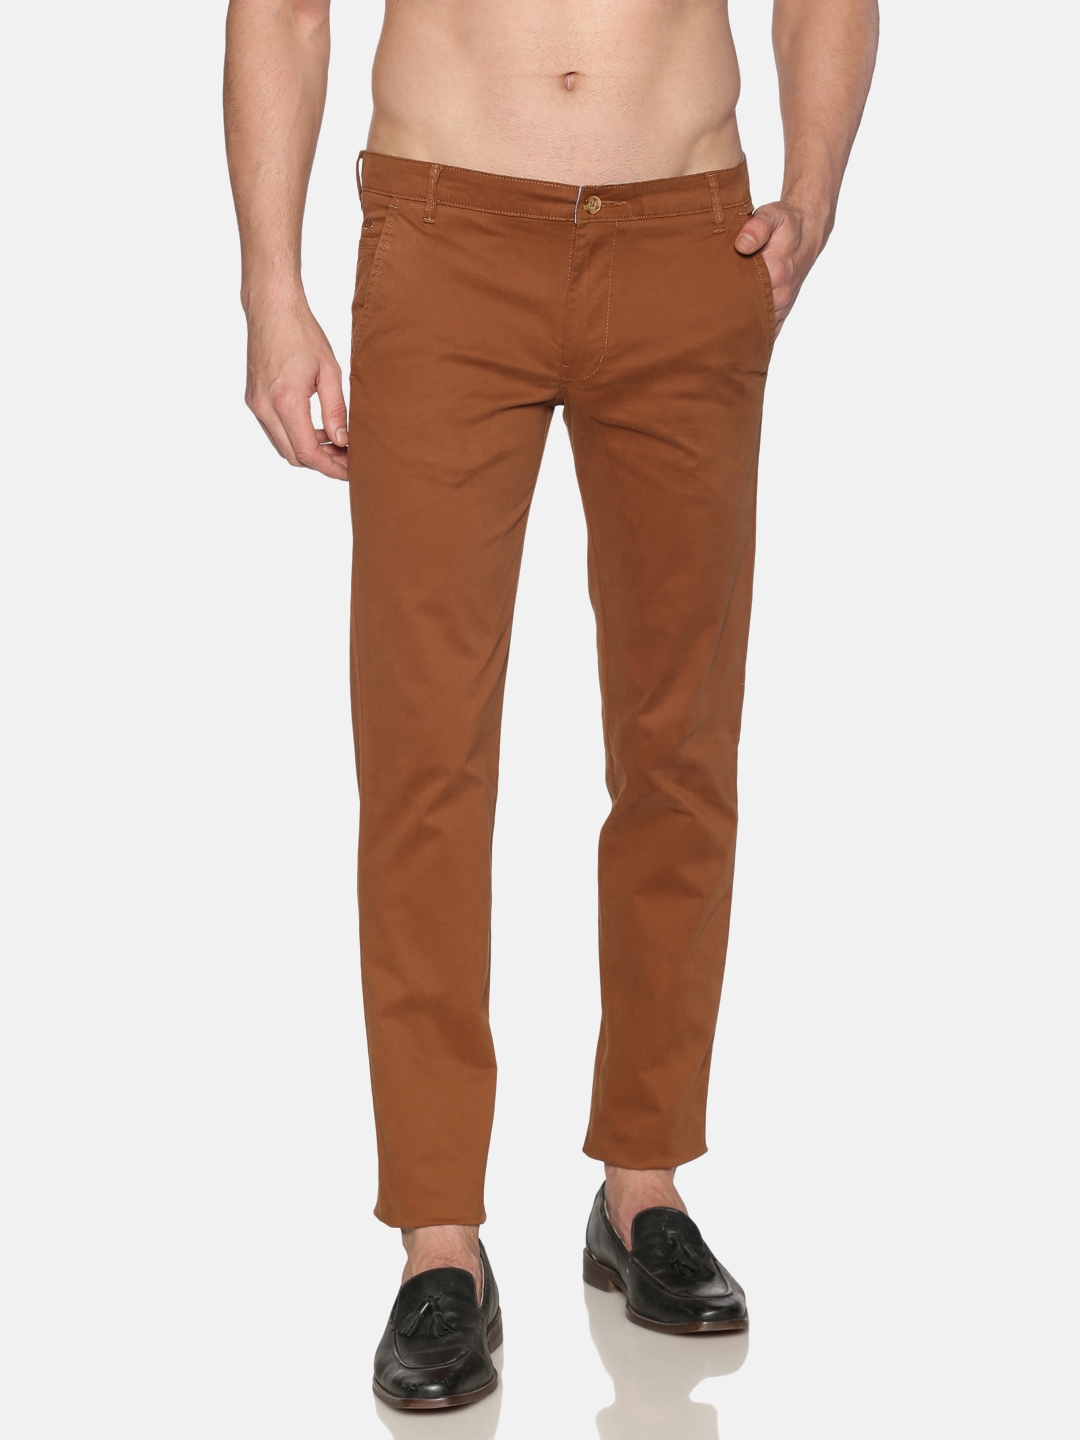 Chennis | Chennis Men's Casual Rust Trousers